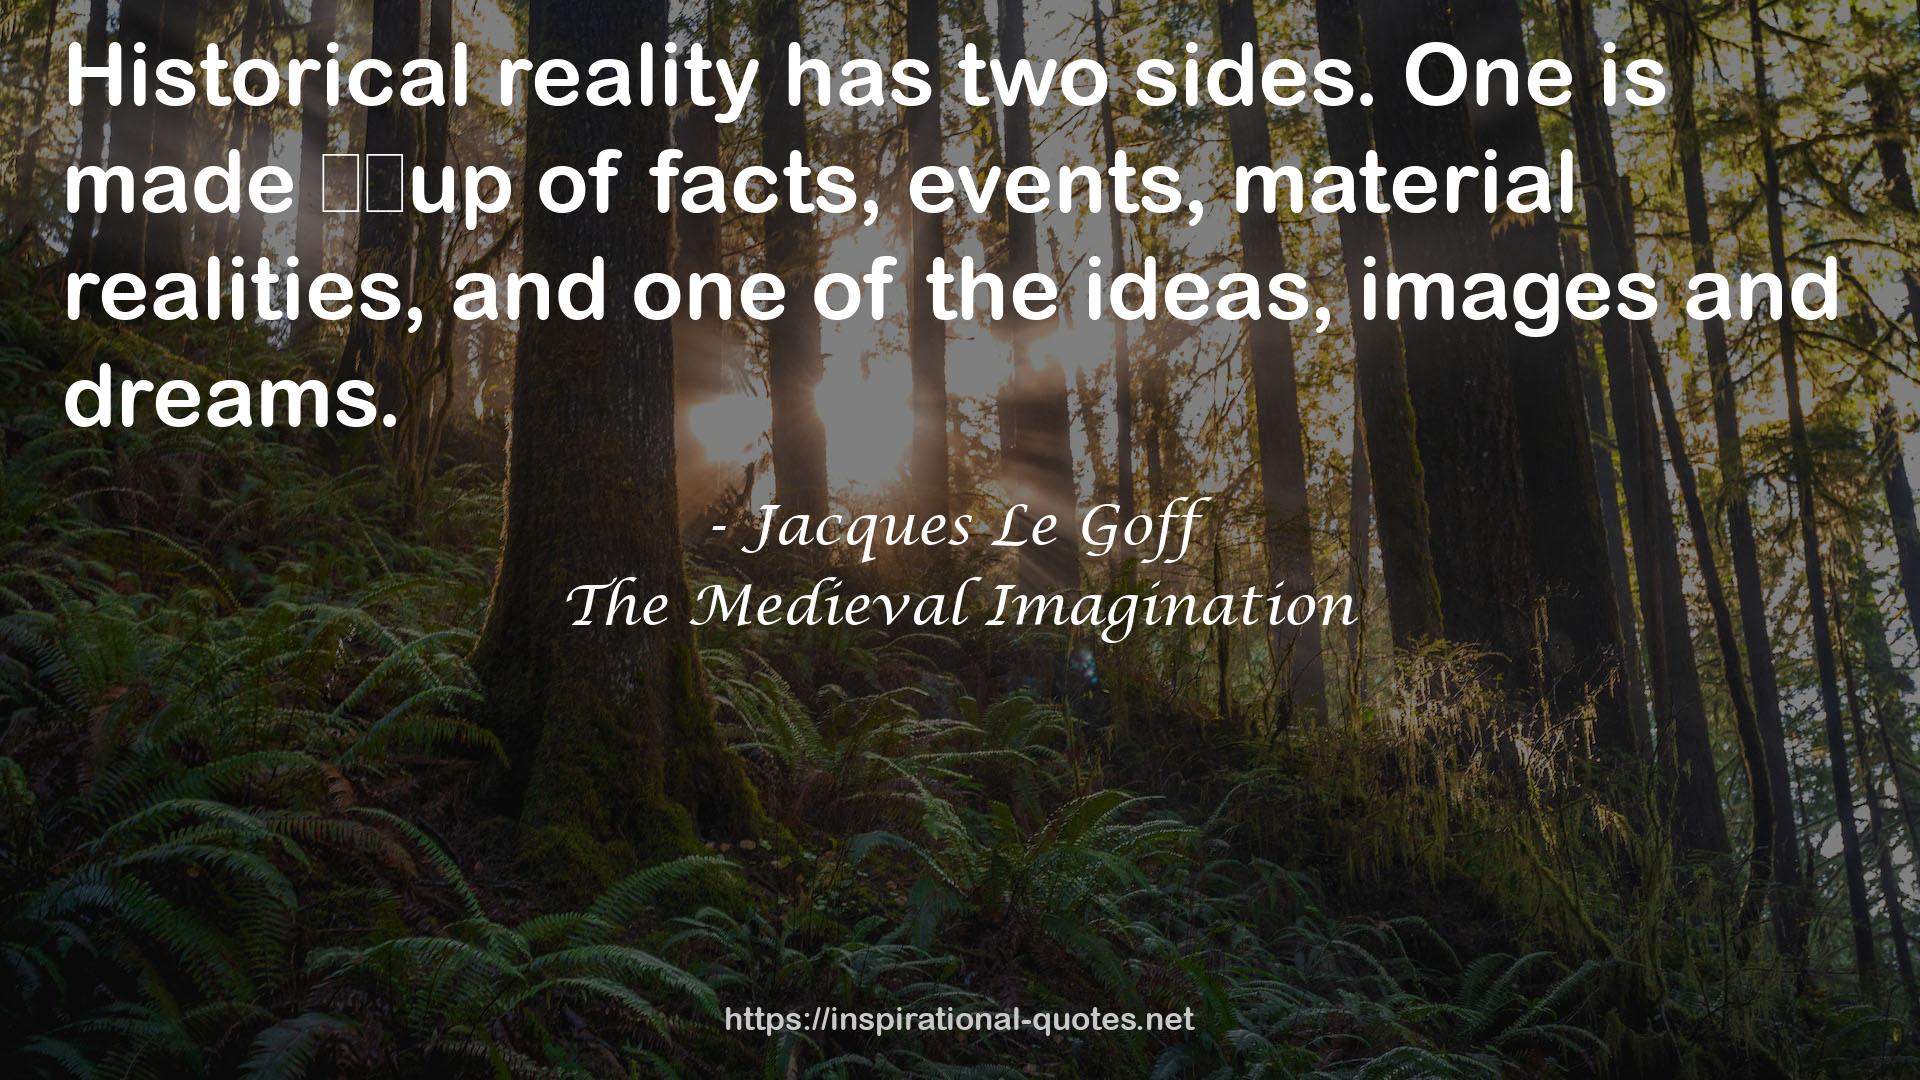 The Medieval Imagination QUOTES